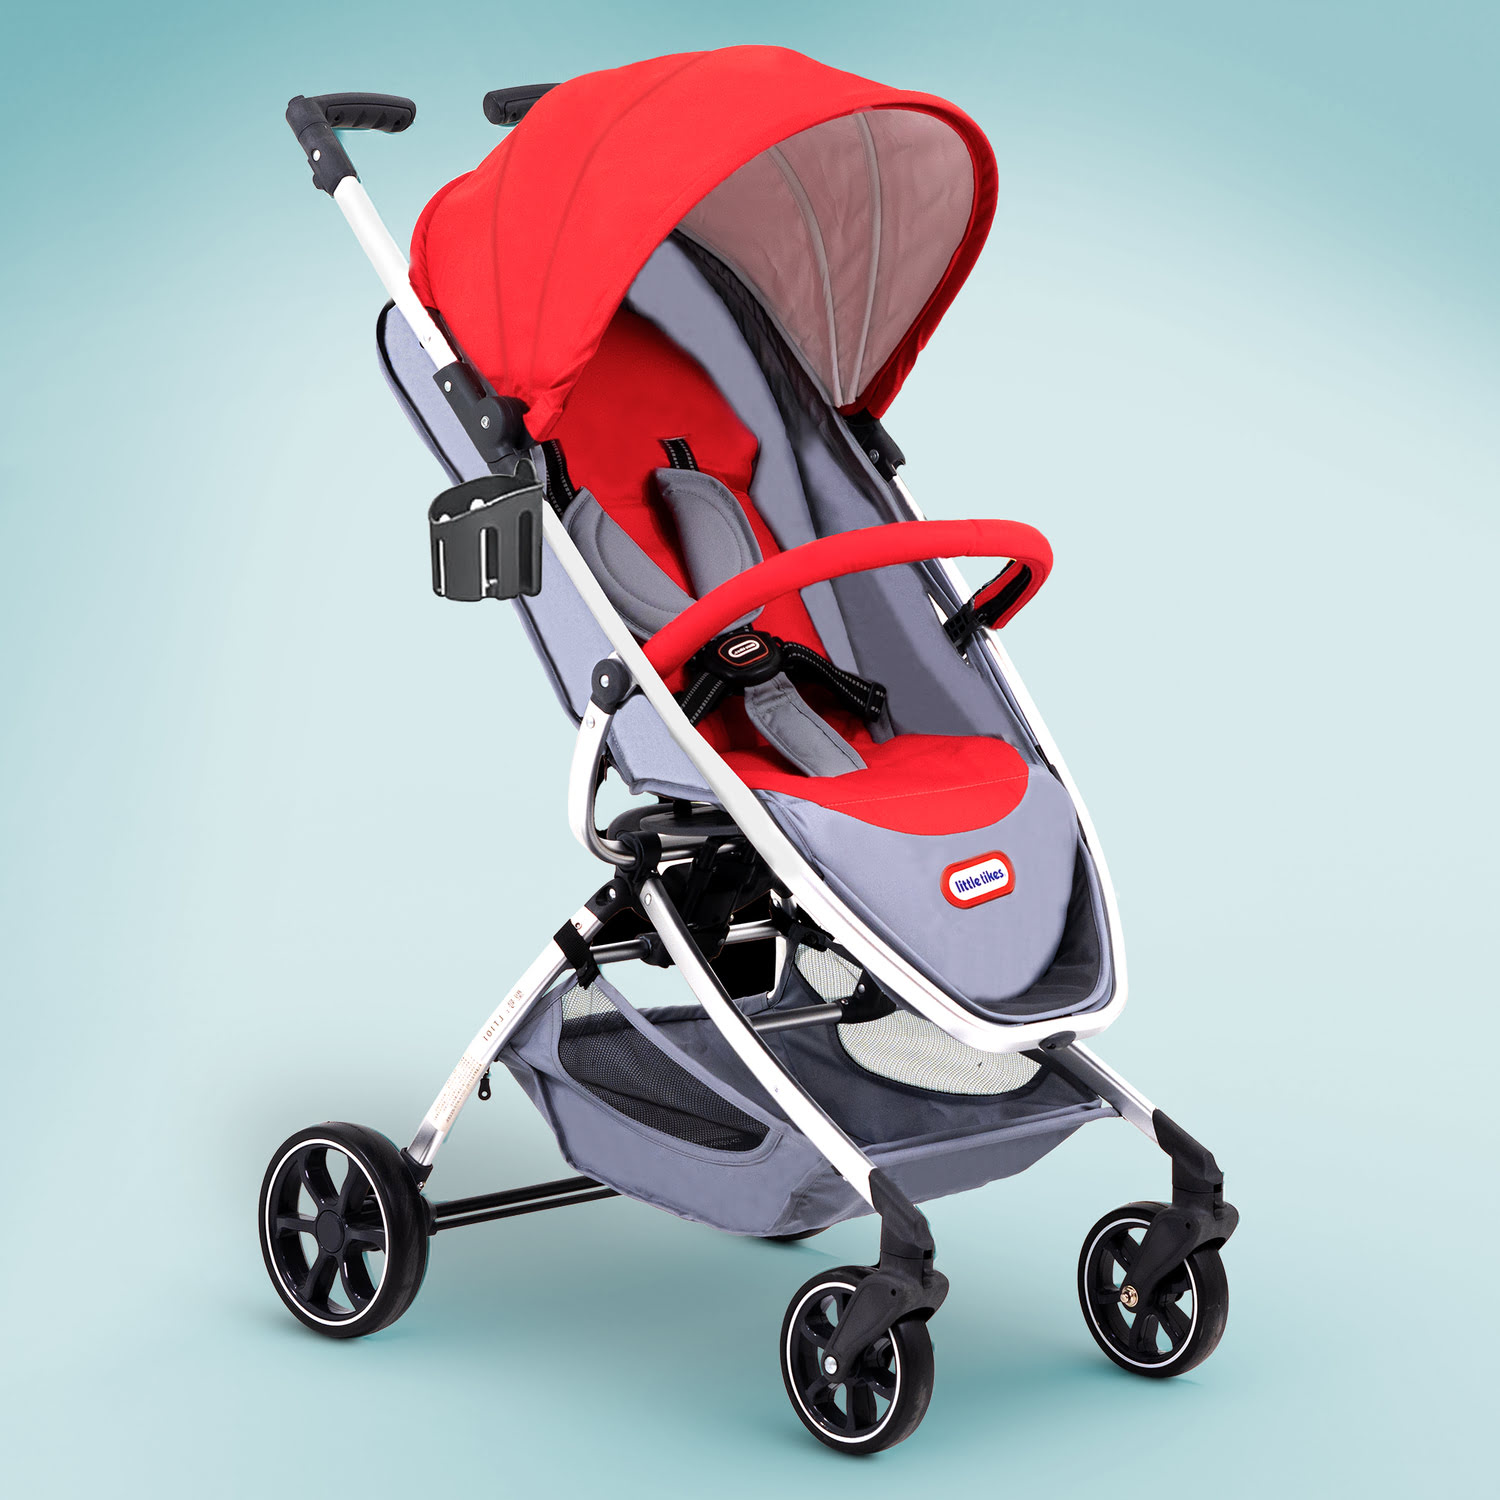 Foldable Baby Stroller for Easy Travel and Convenience